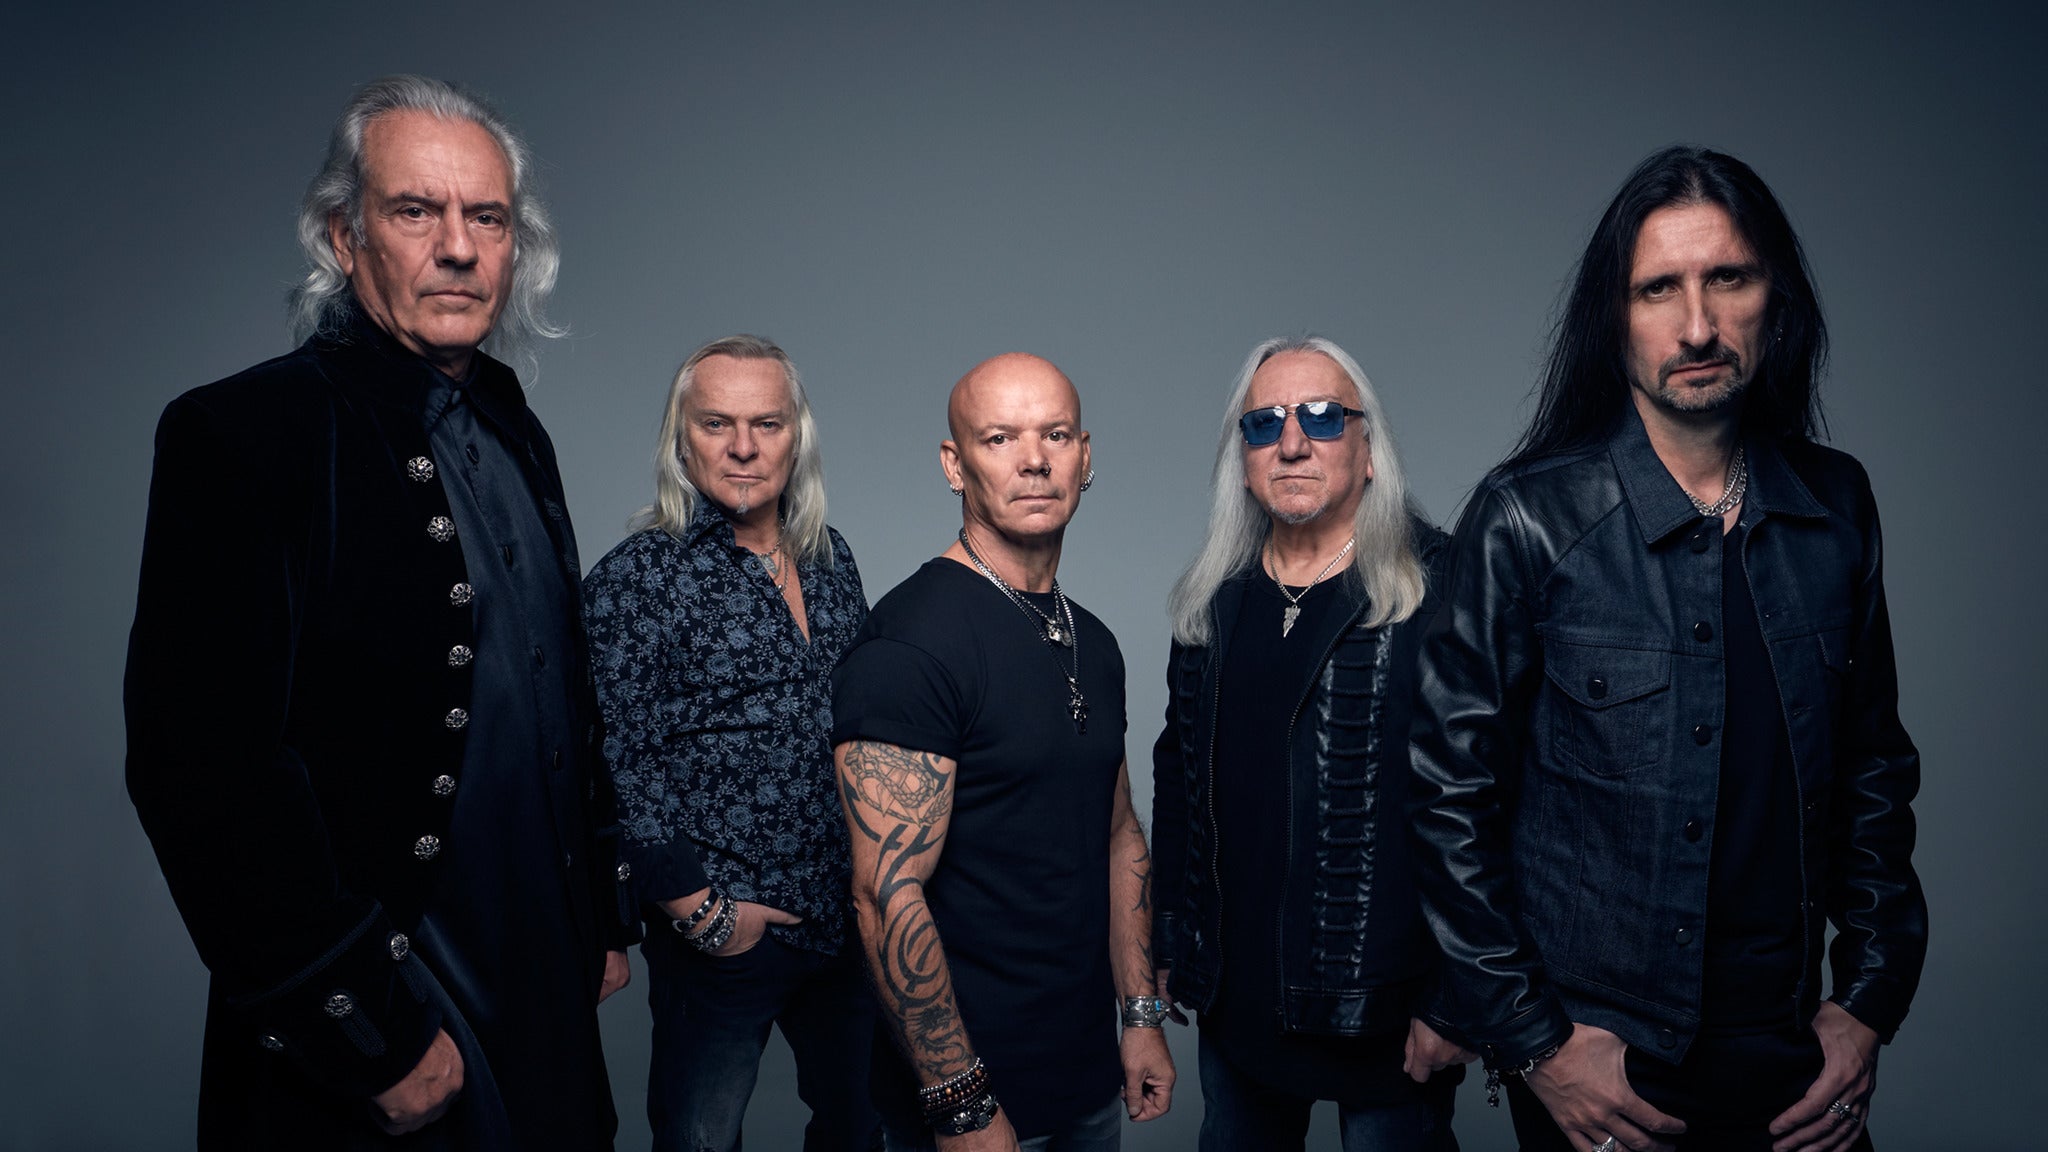 An Evening with Uriah Heep - 50th Anniversary - Lockdown To Rockdown